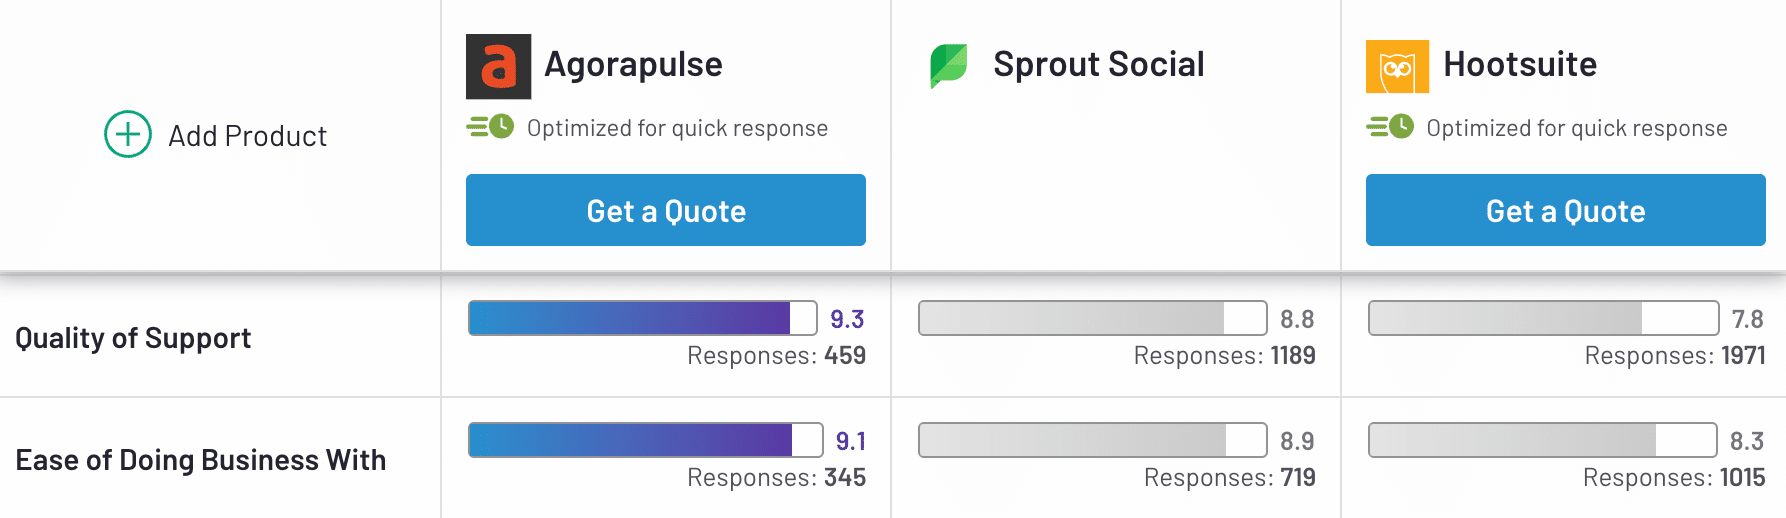 quality of support rankings on agorapulse, sprout social, and hootsuite